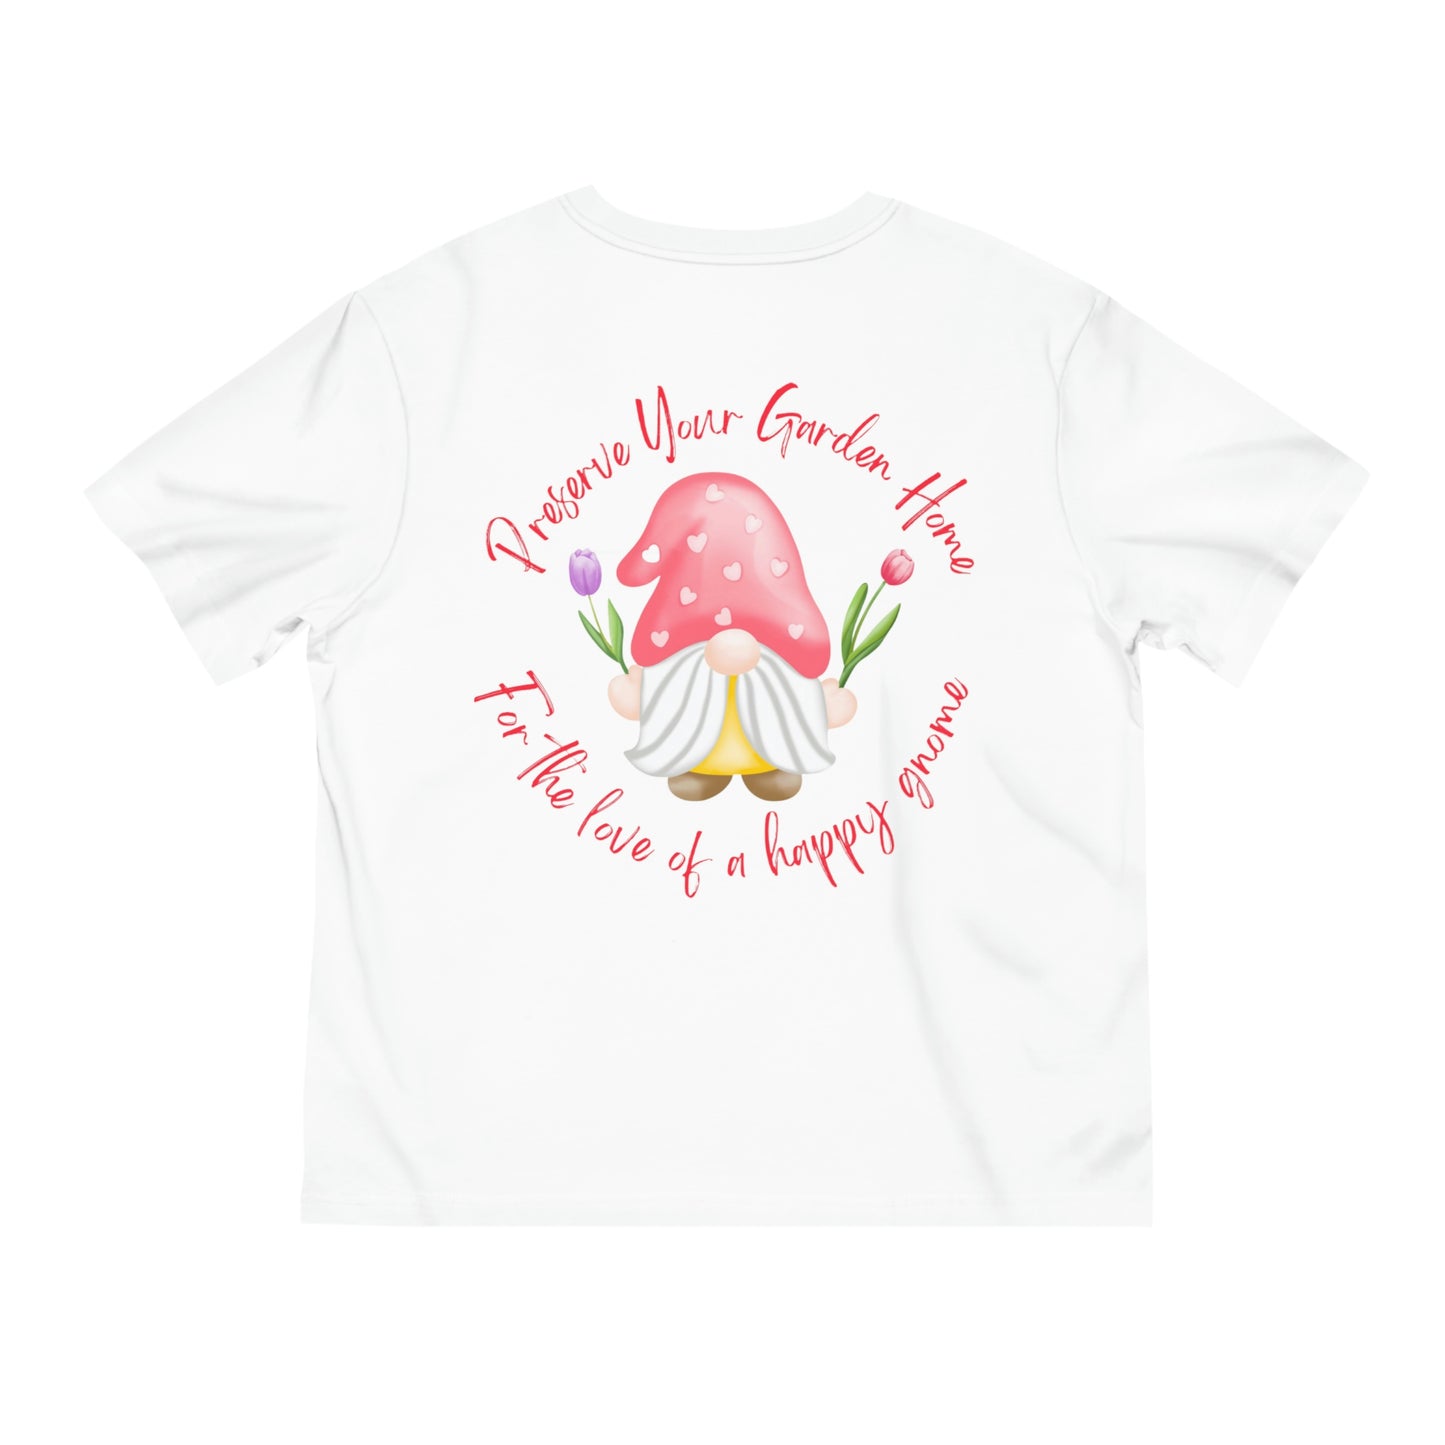 ‘Preserve your garden home, for the love of a happy gnome’ Eco-Friendly. Printed Front & Back.  Unisex Fuser T-shirt